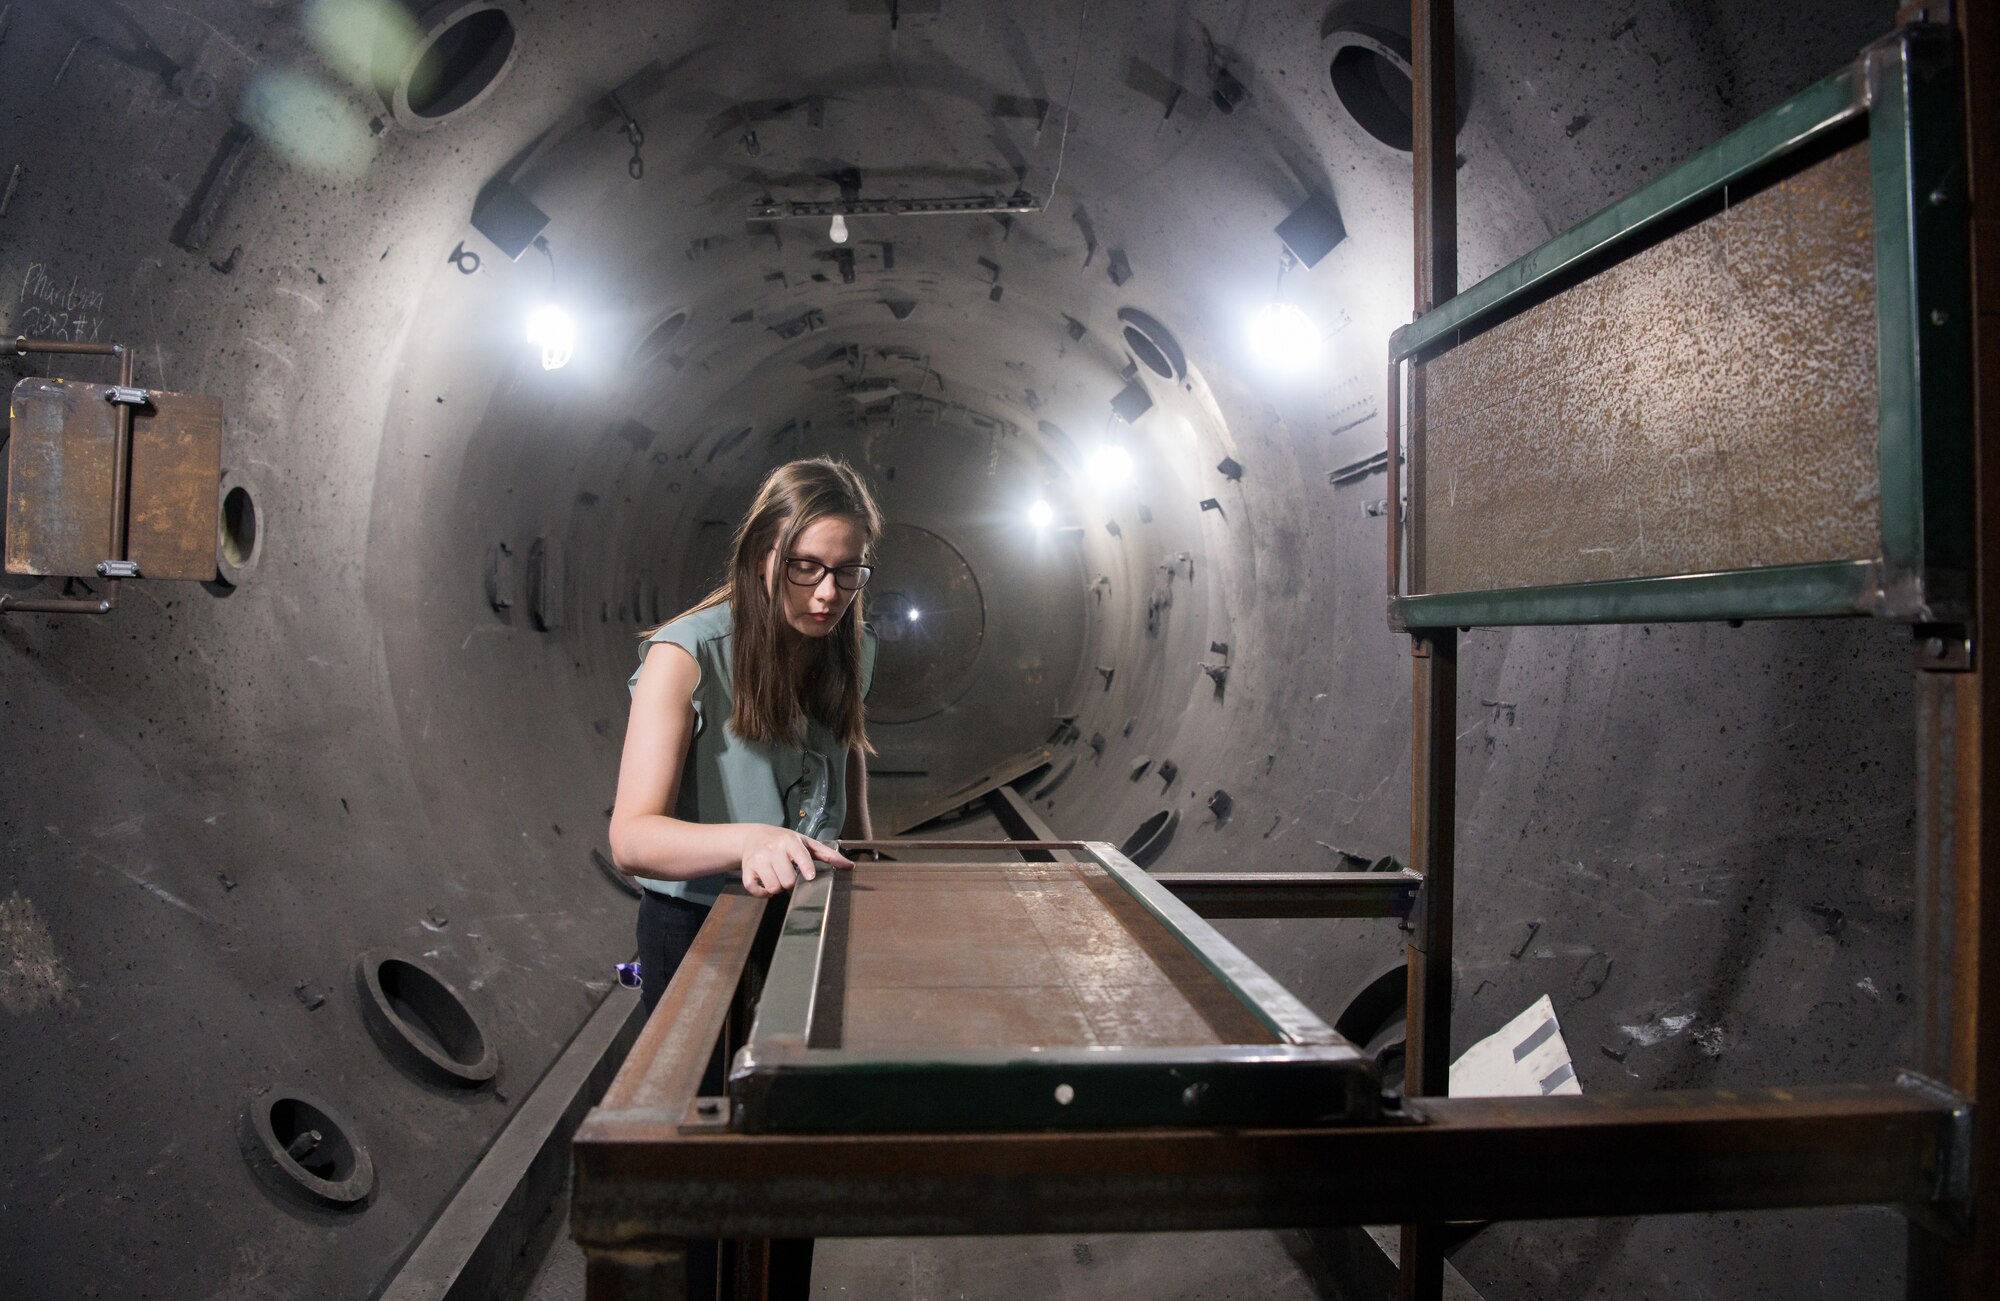 Bonni McKinney, test engineer for the Hypervelocity Flyout, Impact and Lethality Ground T&E capability, inspects frames used for capturing X-ray images of projectiles in Range G, July 21, 2020, at Arnold Air Force Base, Tenn. The range is instrumented to allow engineers to capture data about the flight of the projectiles. (U.S. Air Force photo by Jill Pickett)